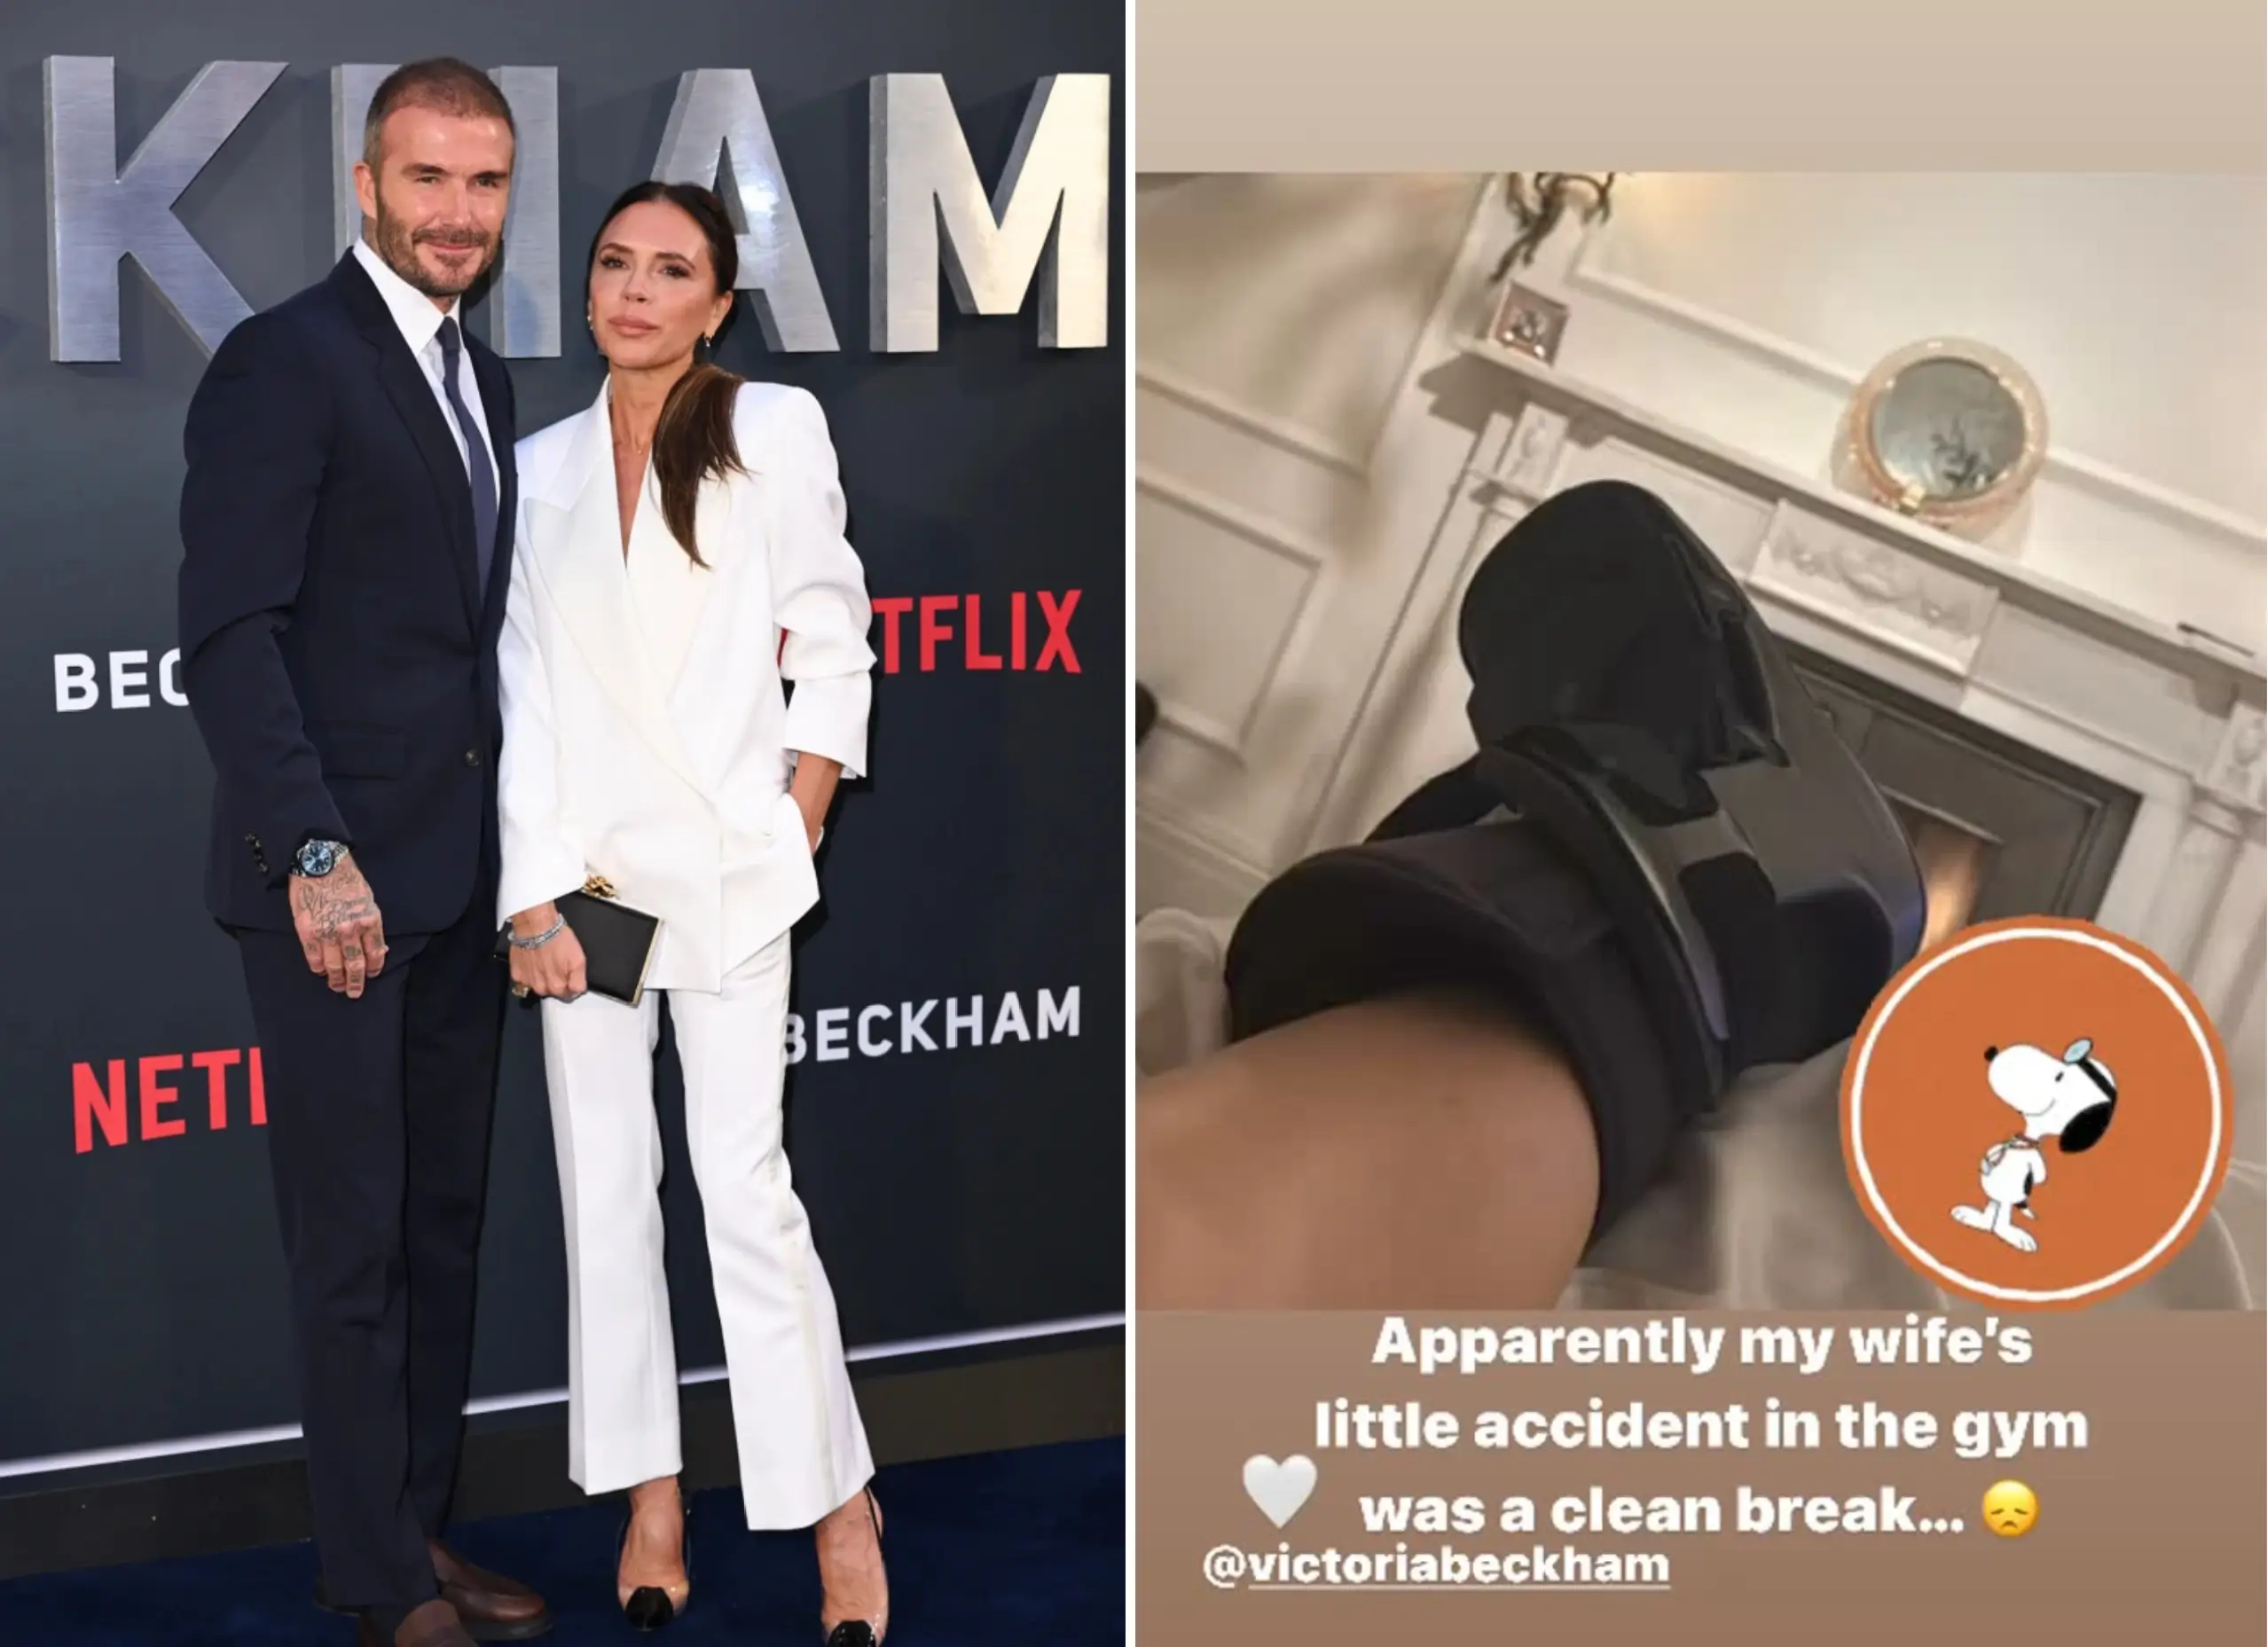 David Beckham’s Supportive Gesture for Victoria’s Gym Accident: A Clean Break